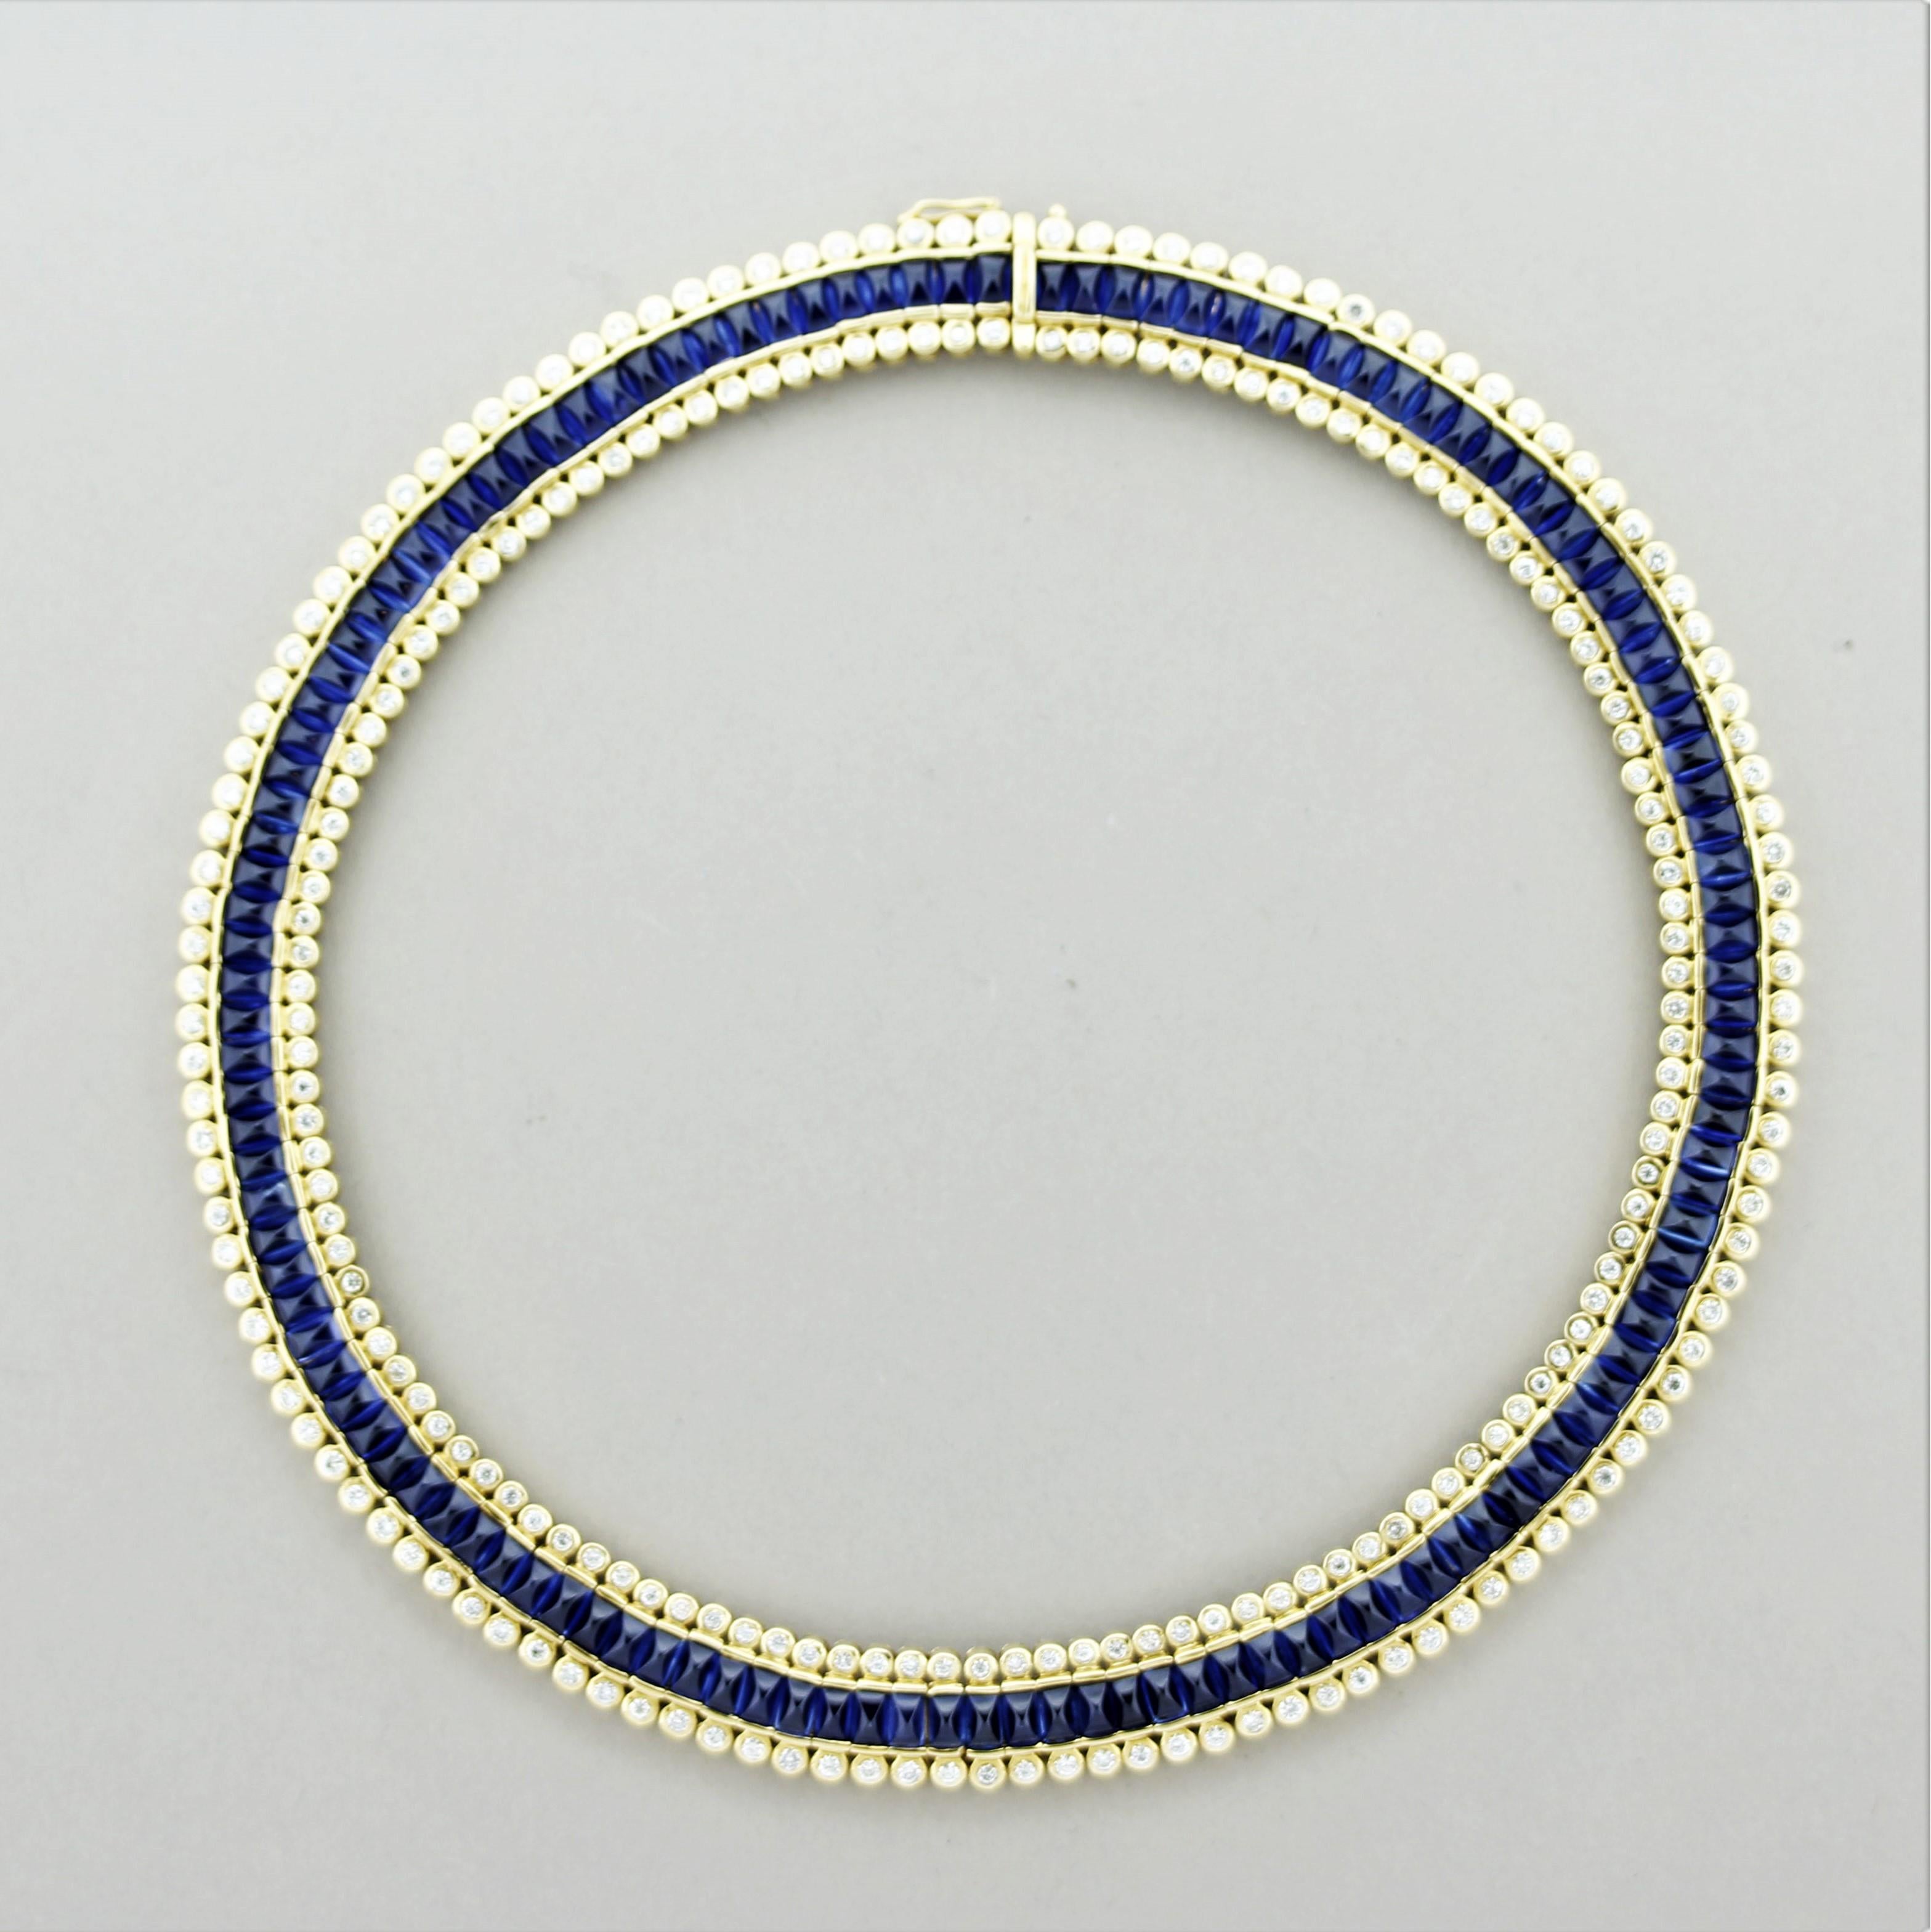 A superb and finely detailed necklace that will bring a smile to your face. It features 47.69 carats of gem sapphire cut as sugerloafs. The sapphires have a rich vivid blue color seen in the finest of sapphires. Accenting the blue gems are 6.61